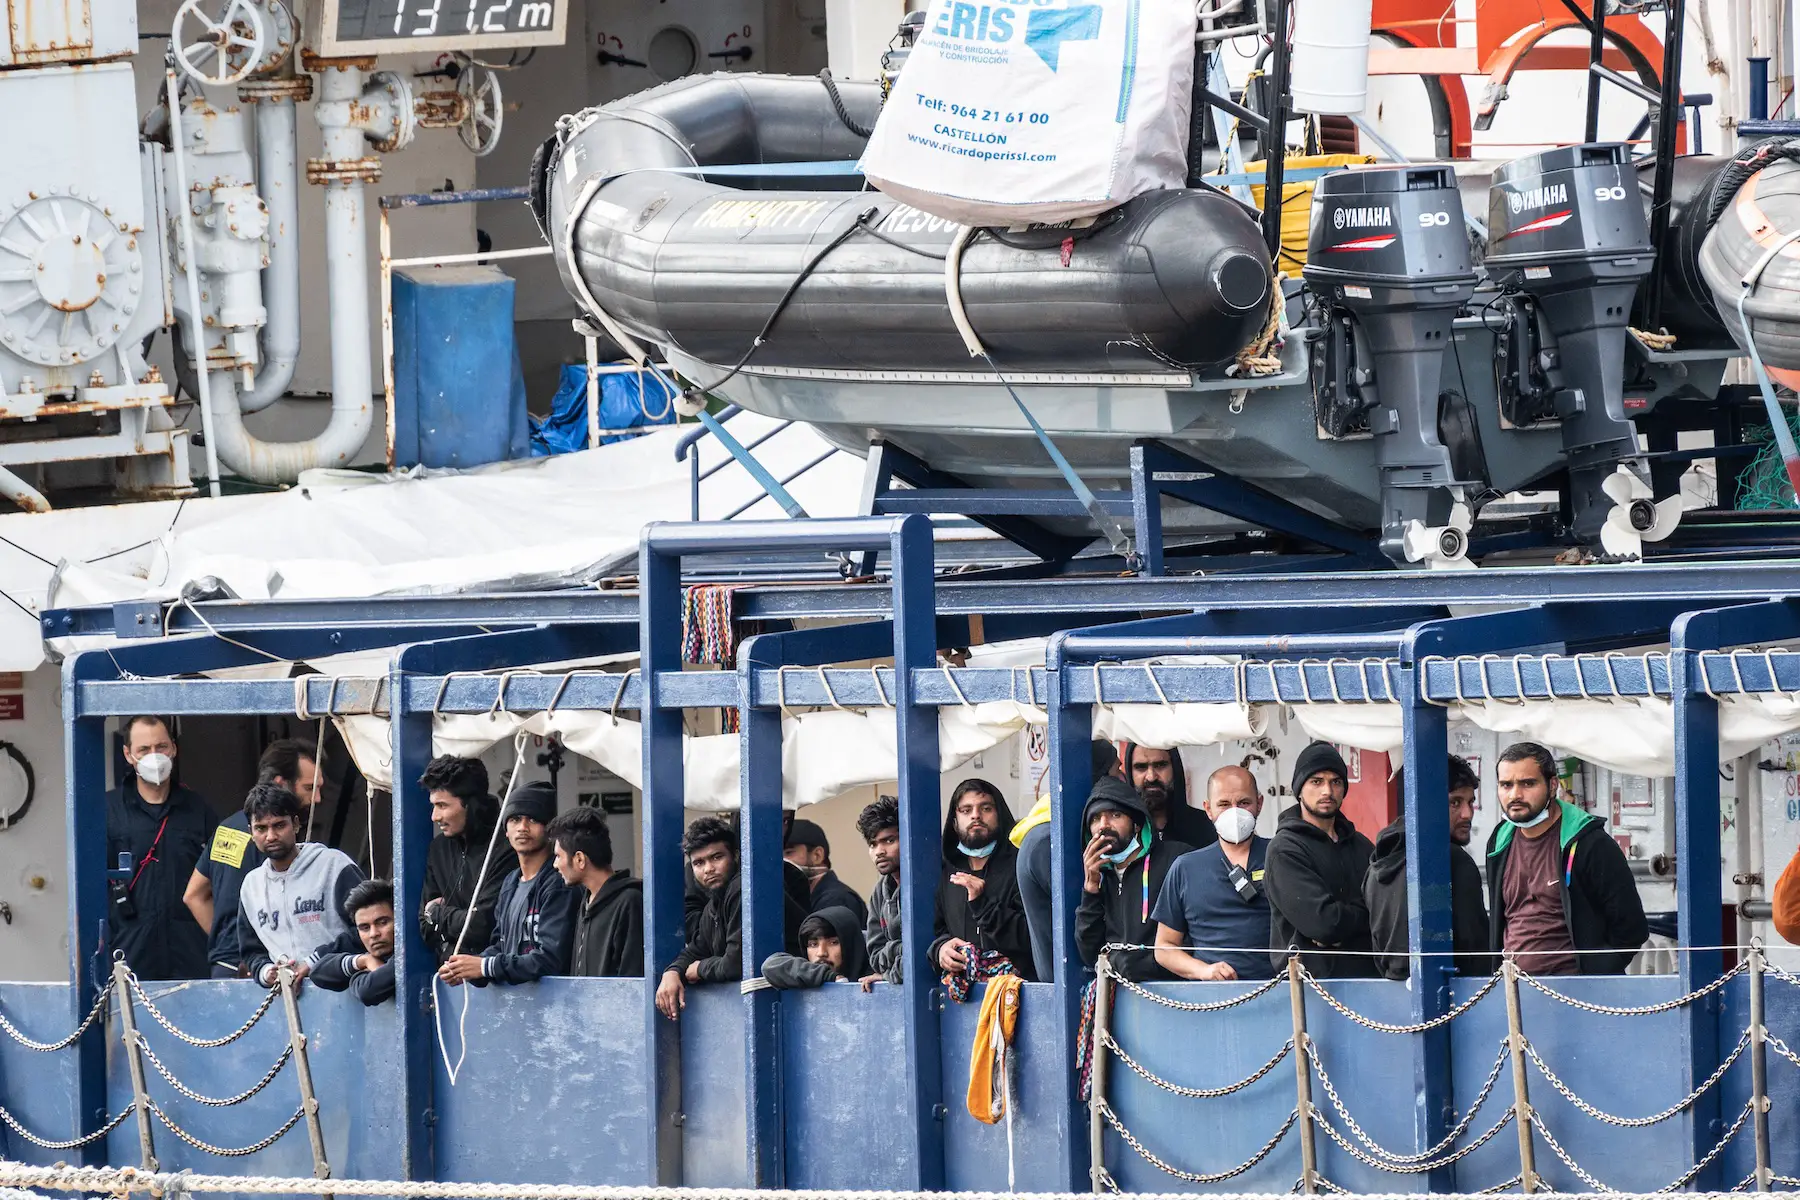 A group of migrant men look out over the edge of a boat docked in Italy's harbor while NGO staff stand masked beside them